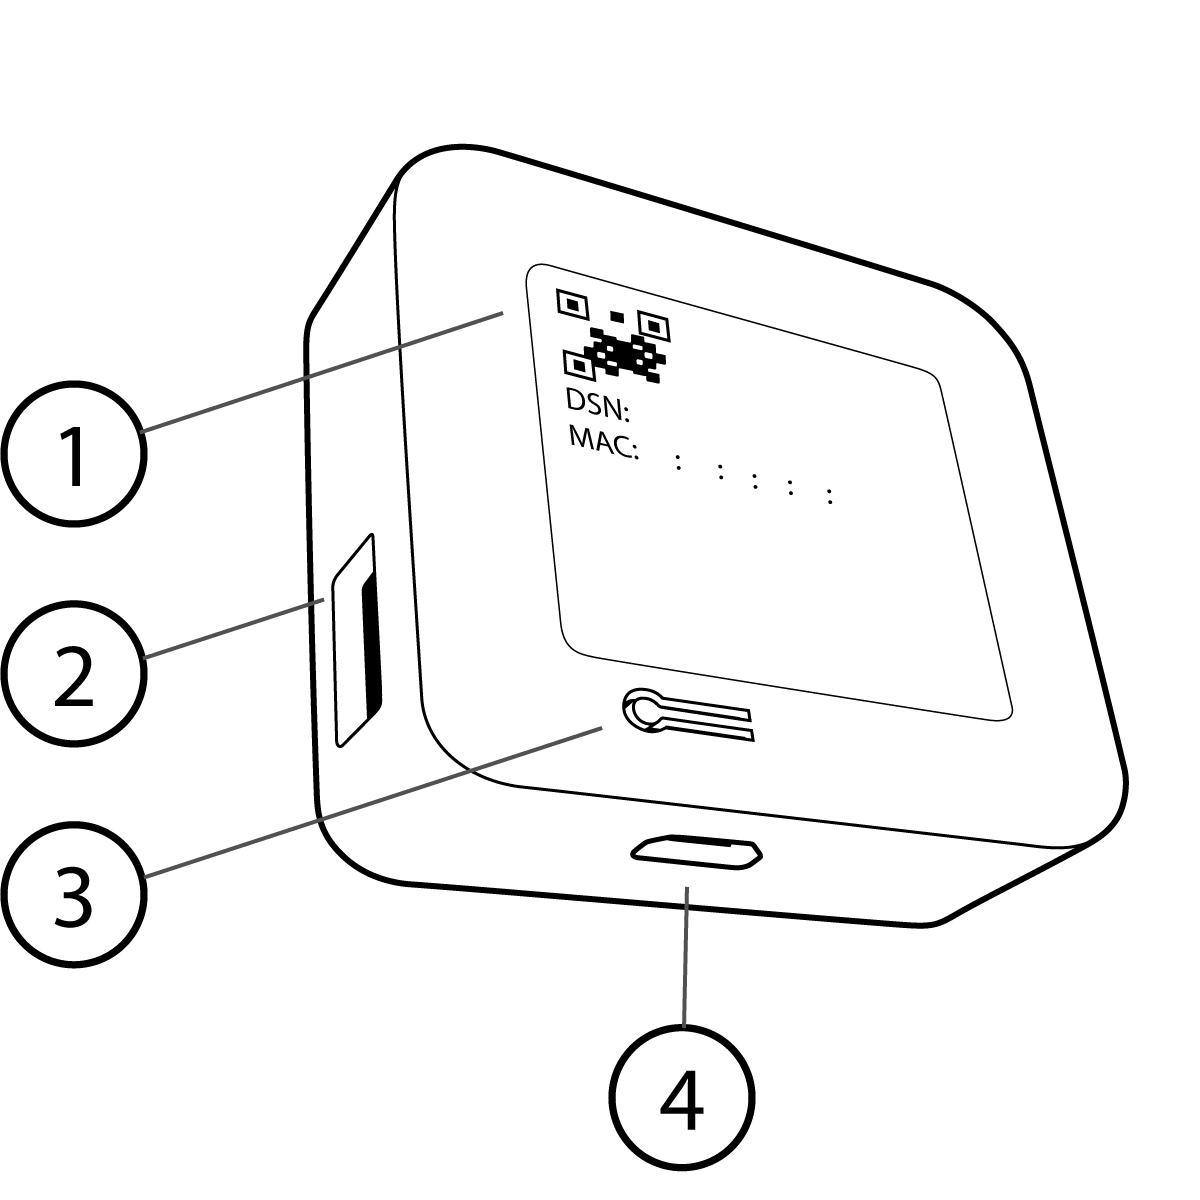 image showing a sync module with the back facing toward you. A square label is placed in a shallow recess thats almost as big as the sync module and a reset button is cut out of the material just outside of the label. On the sides, are a USB A for the USB memory stick, and the mini-USB for the power cord is adjacent to the reset button. The front of the Sync Module has two LED lights set back in holes in the upper right corner of the front face.